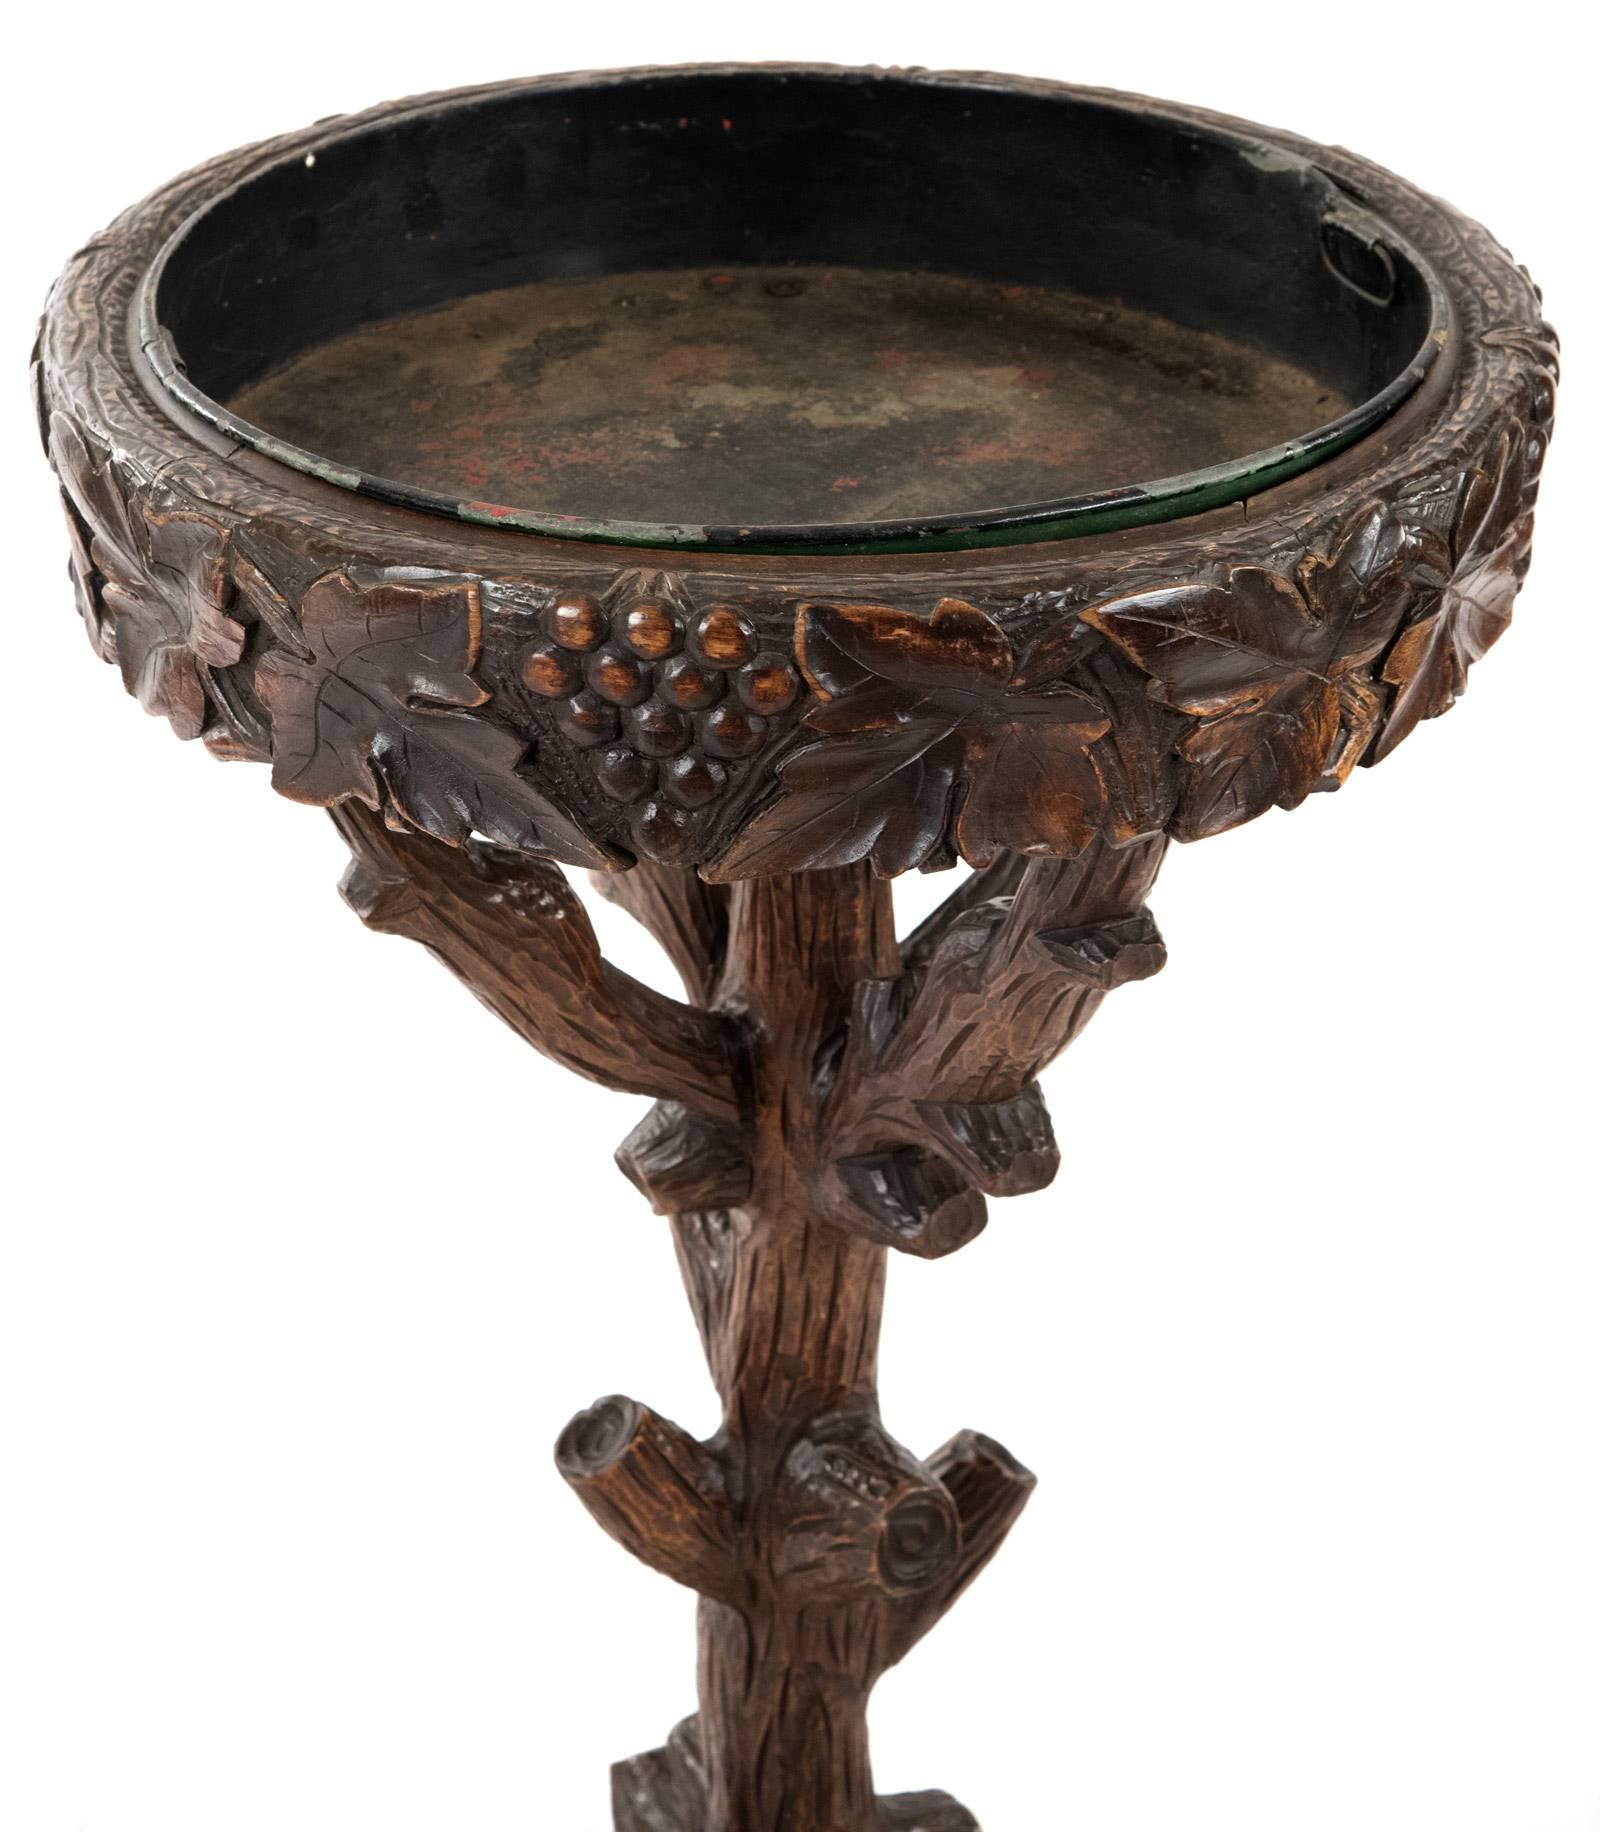 A 19th century black forest stand with a round top, its edges carved in relief with grapes and grape leaves and inset with a round metal dish, all raised on arms, stem and legs carved to represent wooden branches. Measures: 36 x 41 inches.